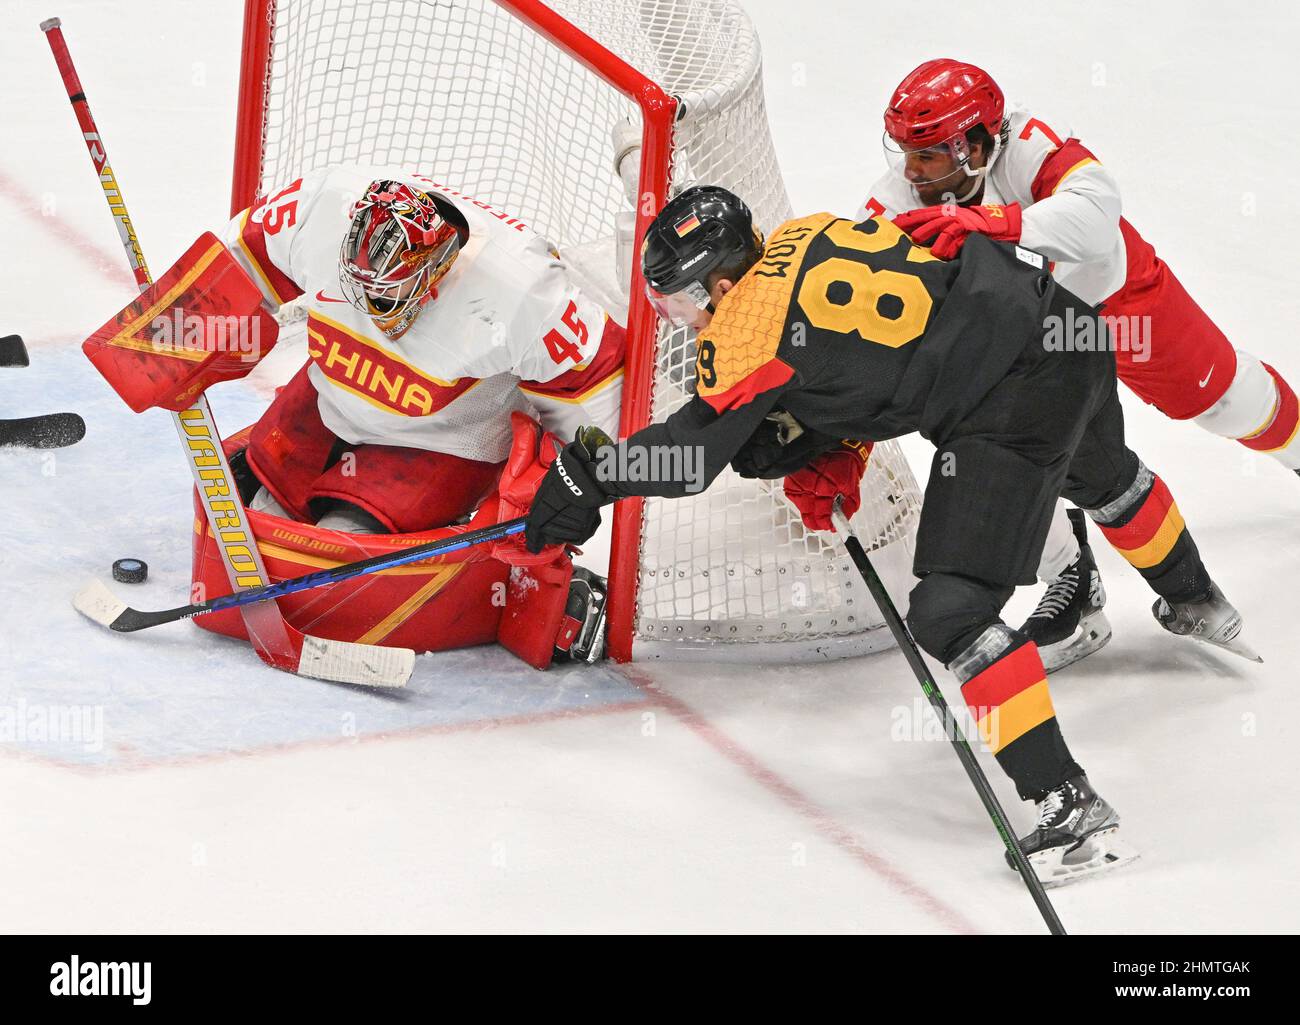 Beijing, China. 12th Feb, 2022. Olympics, ice hockey, preliminary round, Group A, Germany - China, at the National Indoor Stadium, David Wolf of Germany (M) gets a shot off against goalkeeper Jieruimi Shimisi (Jeremy Smith) and Jieke Kailiaosi (Jake Chelios) of China. Credit: Peter Kneffel/dpa/Alamy Live News Stock Photo